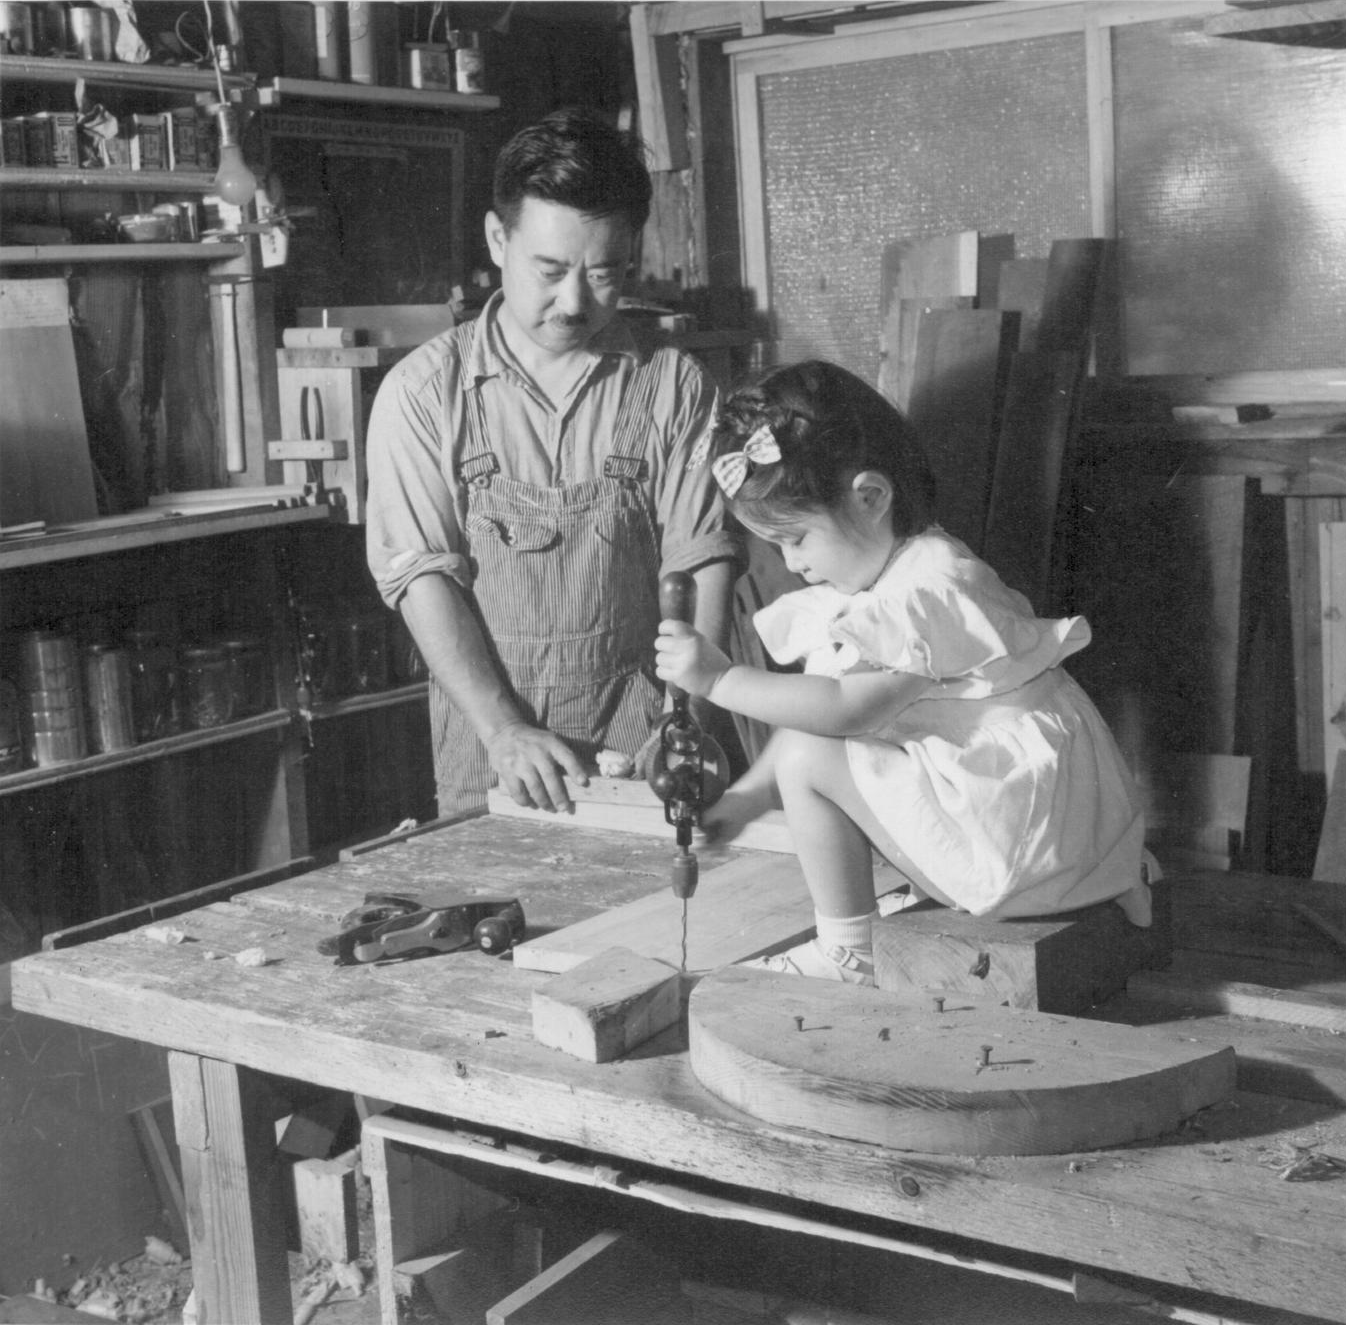 Mira as a child on top of the table with tools helping her father George